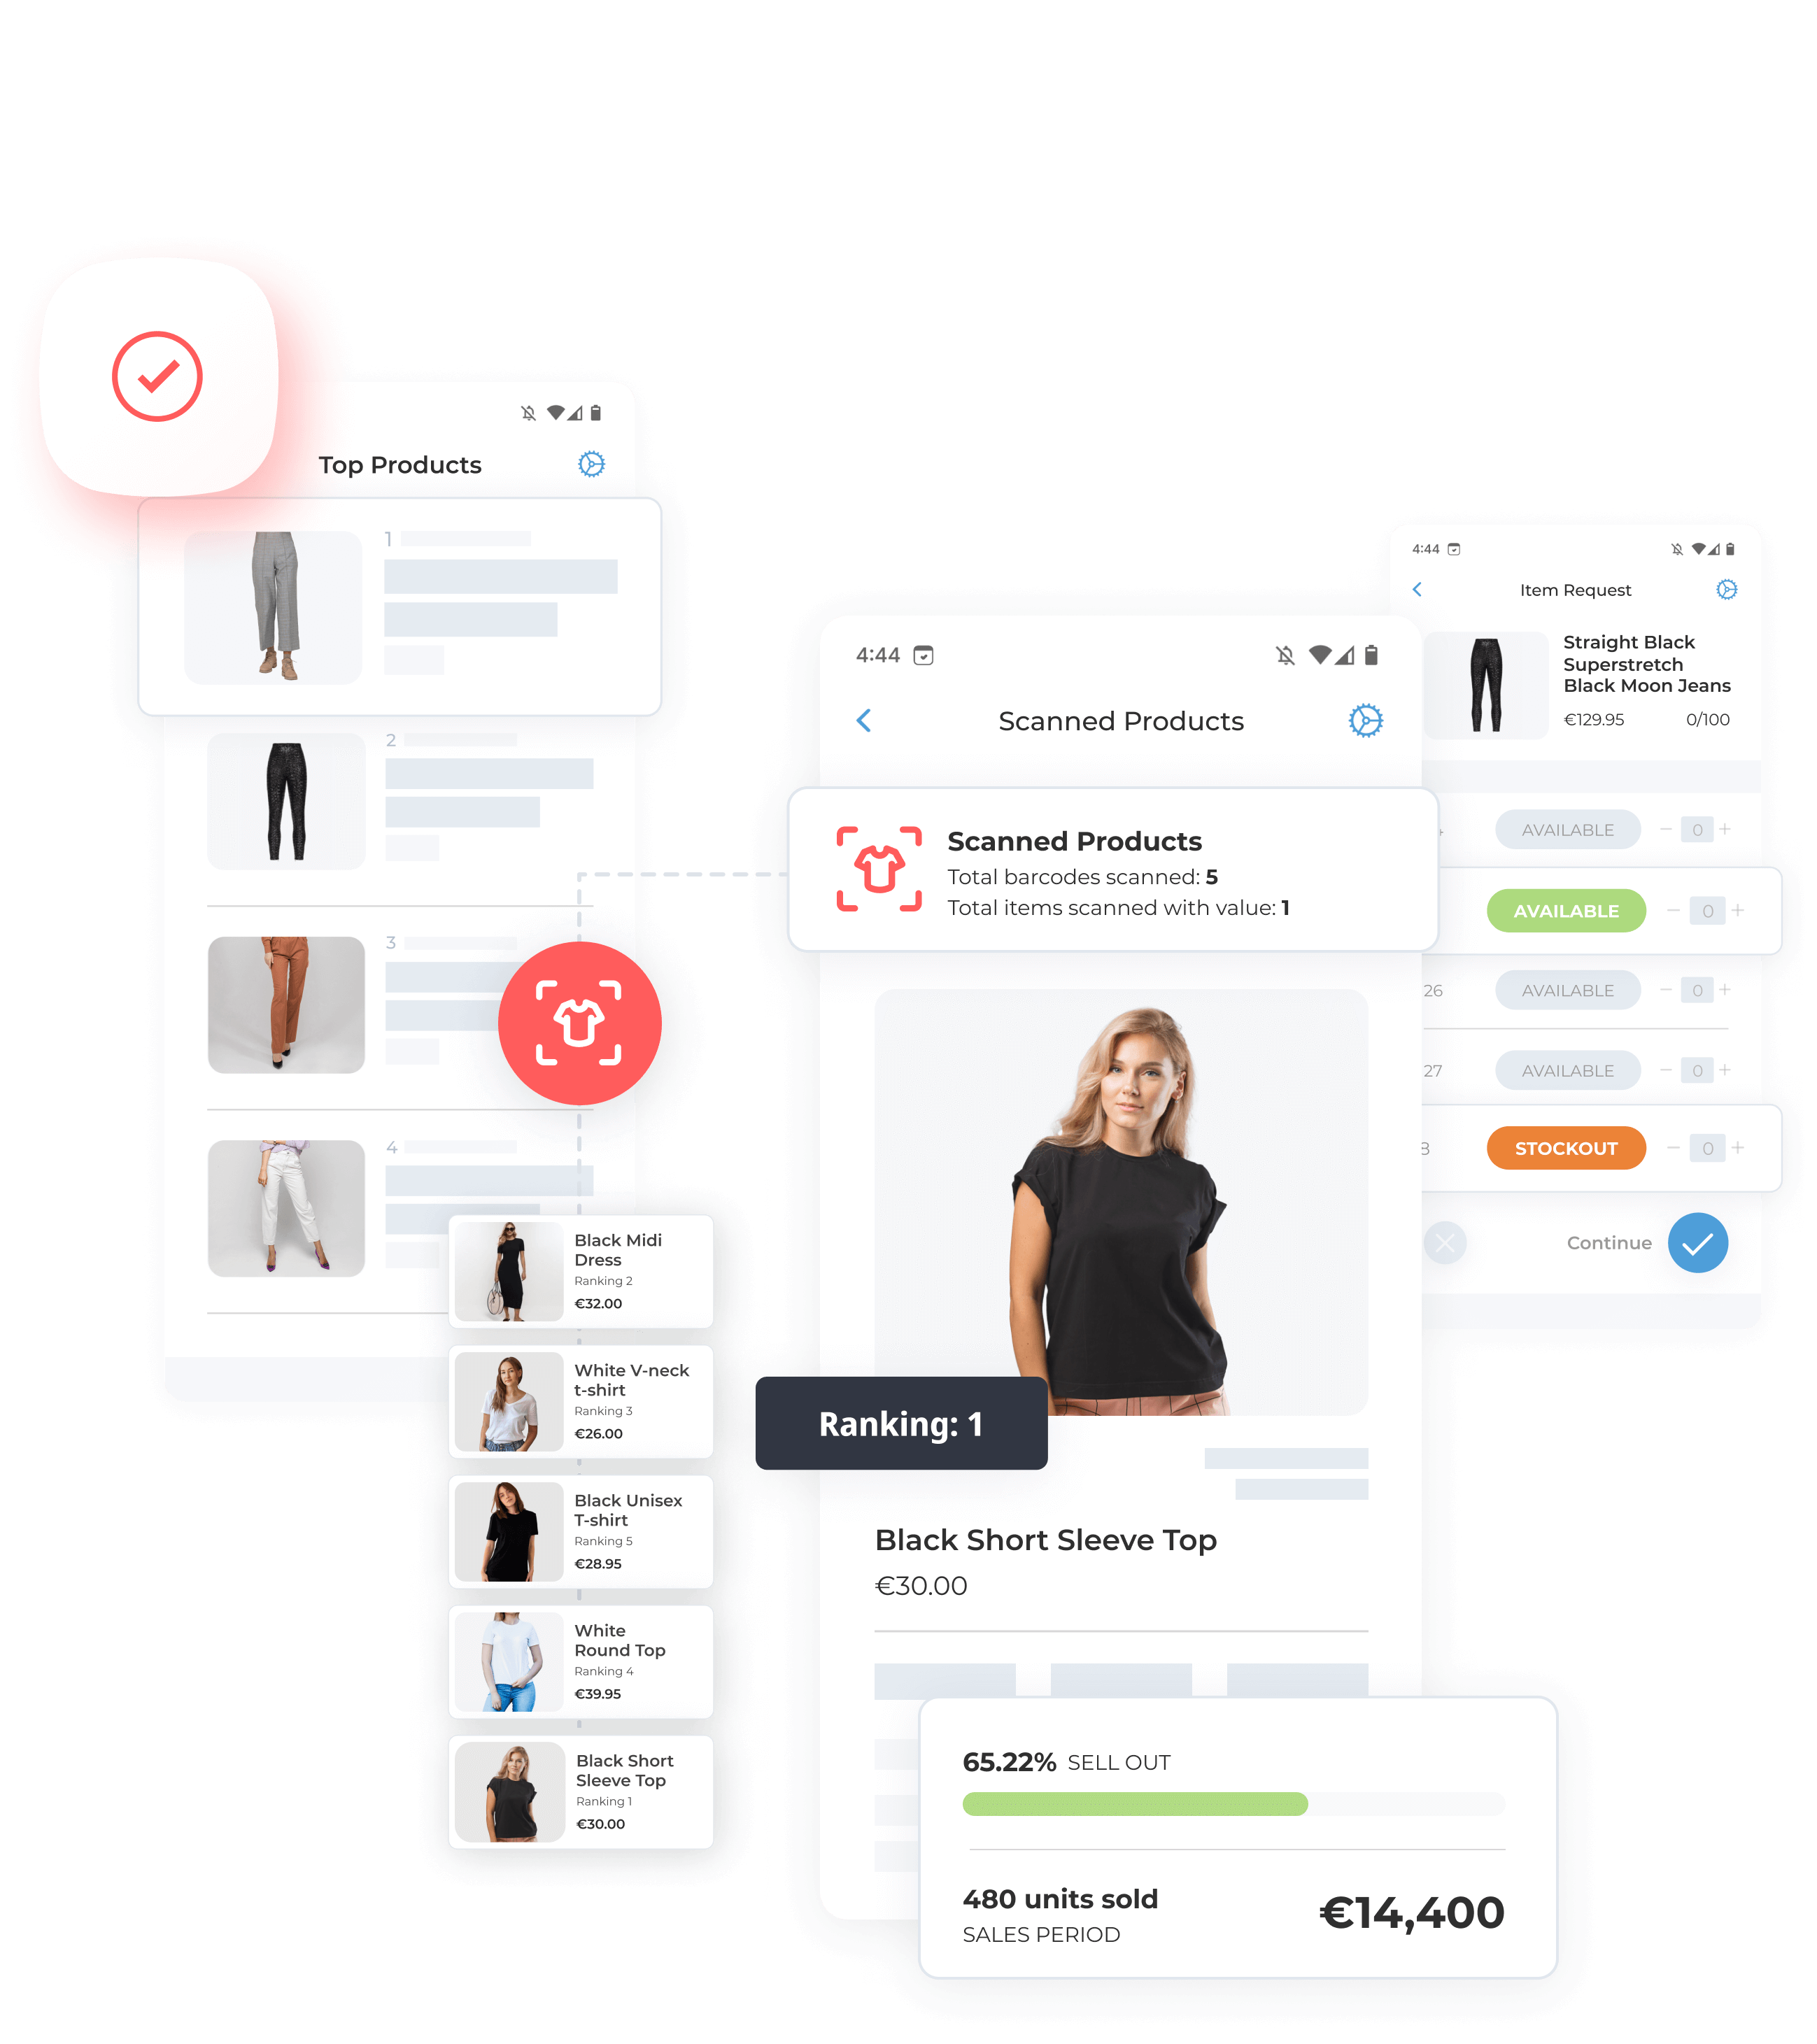 NextaIl Store execution software and mobile app